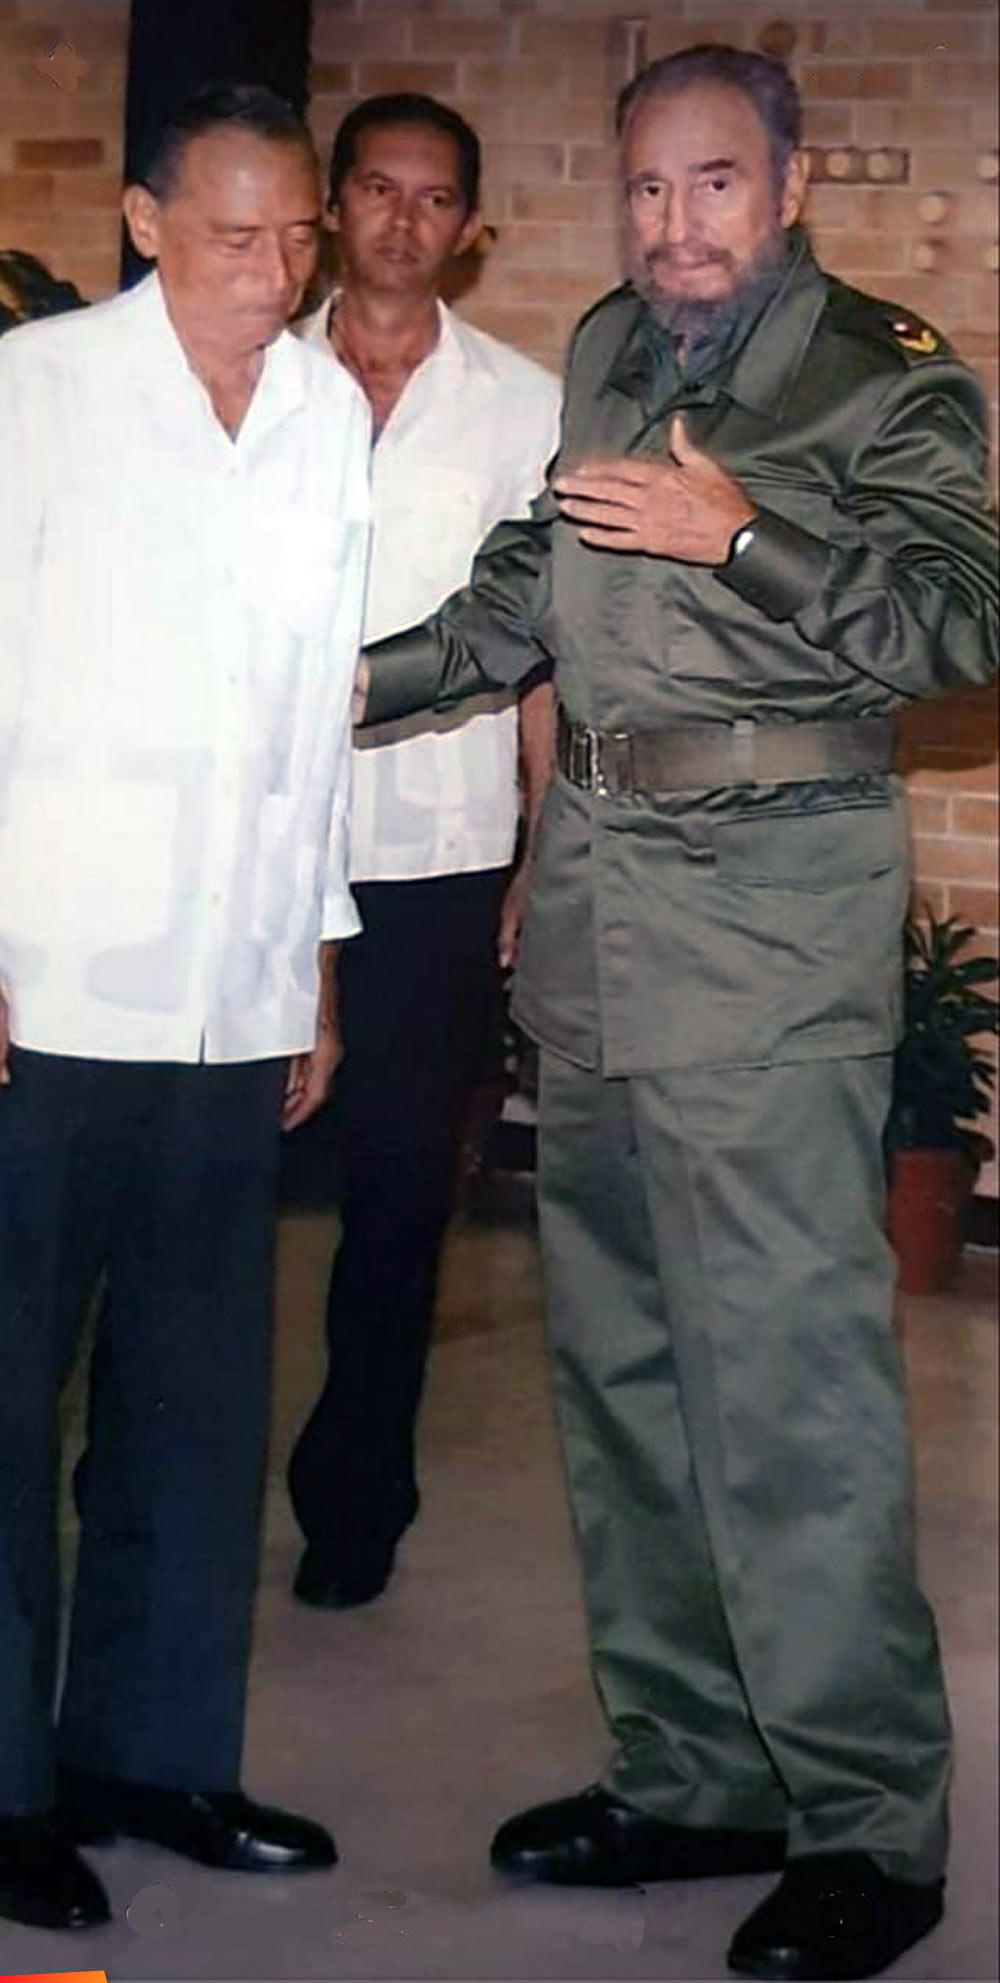 Hon. George Price having a conversation with Fidel Castro, 2005